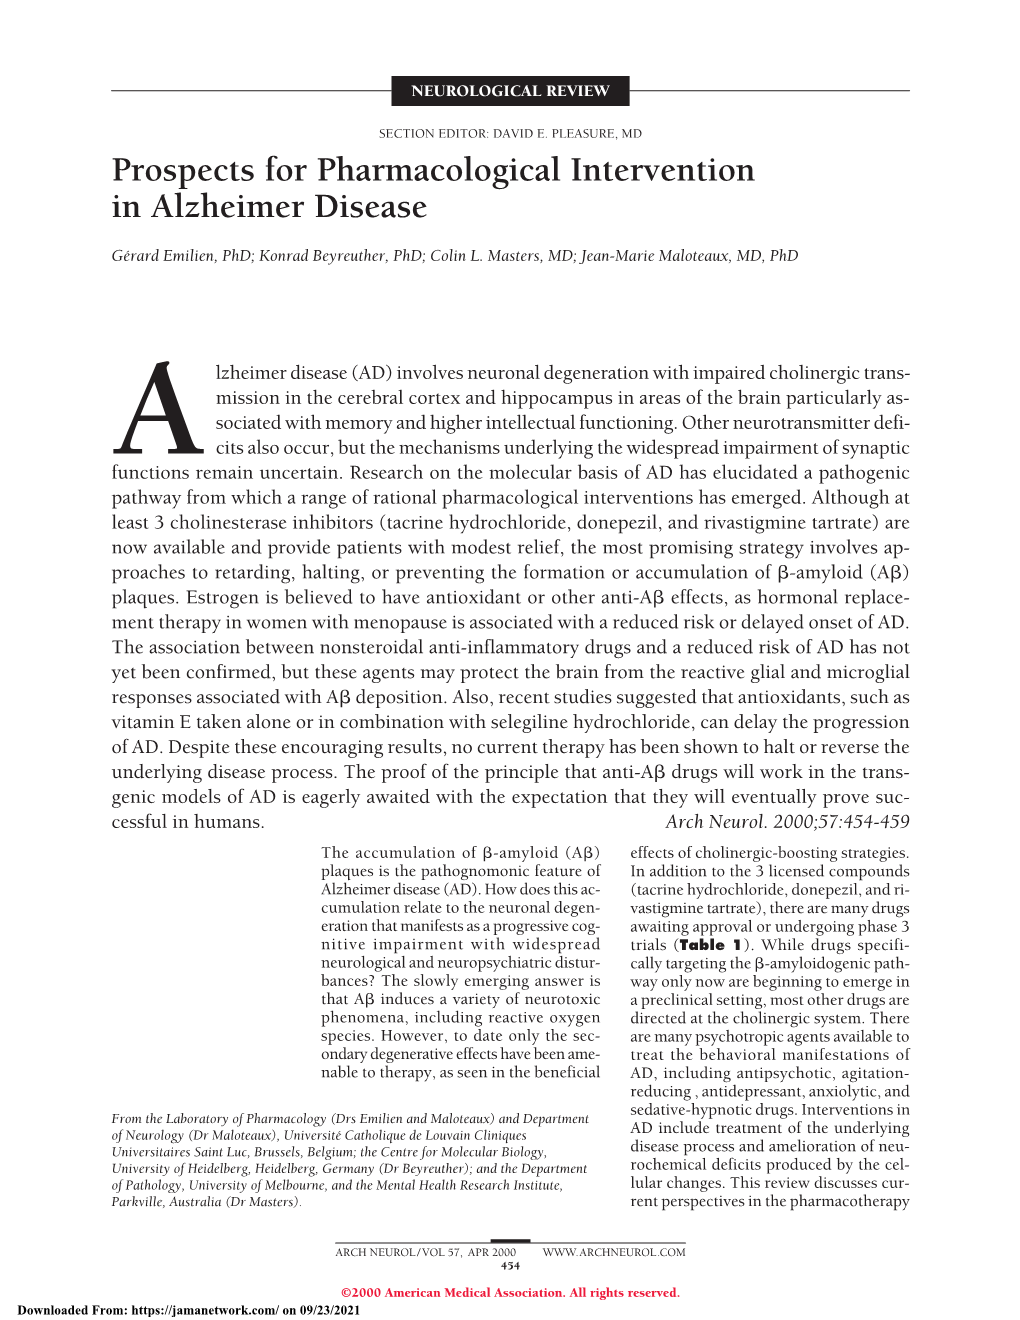 Prospects for Pharmacological Intervention in Alzheimer Disease